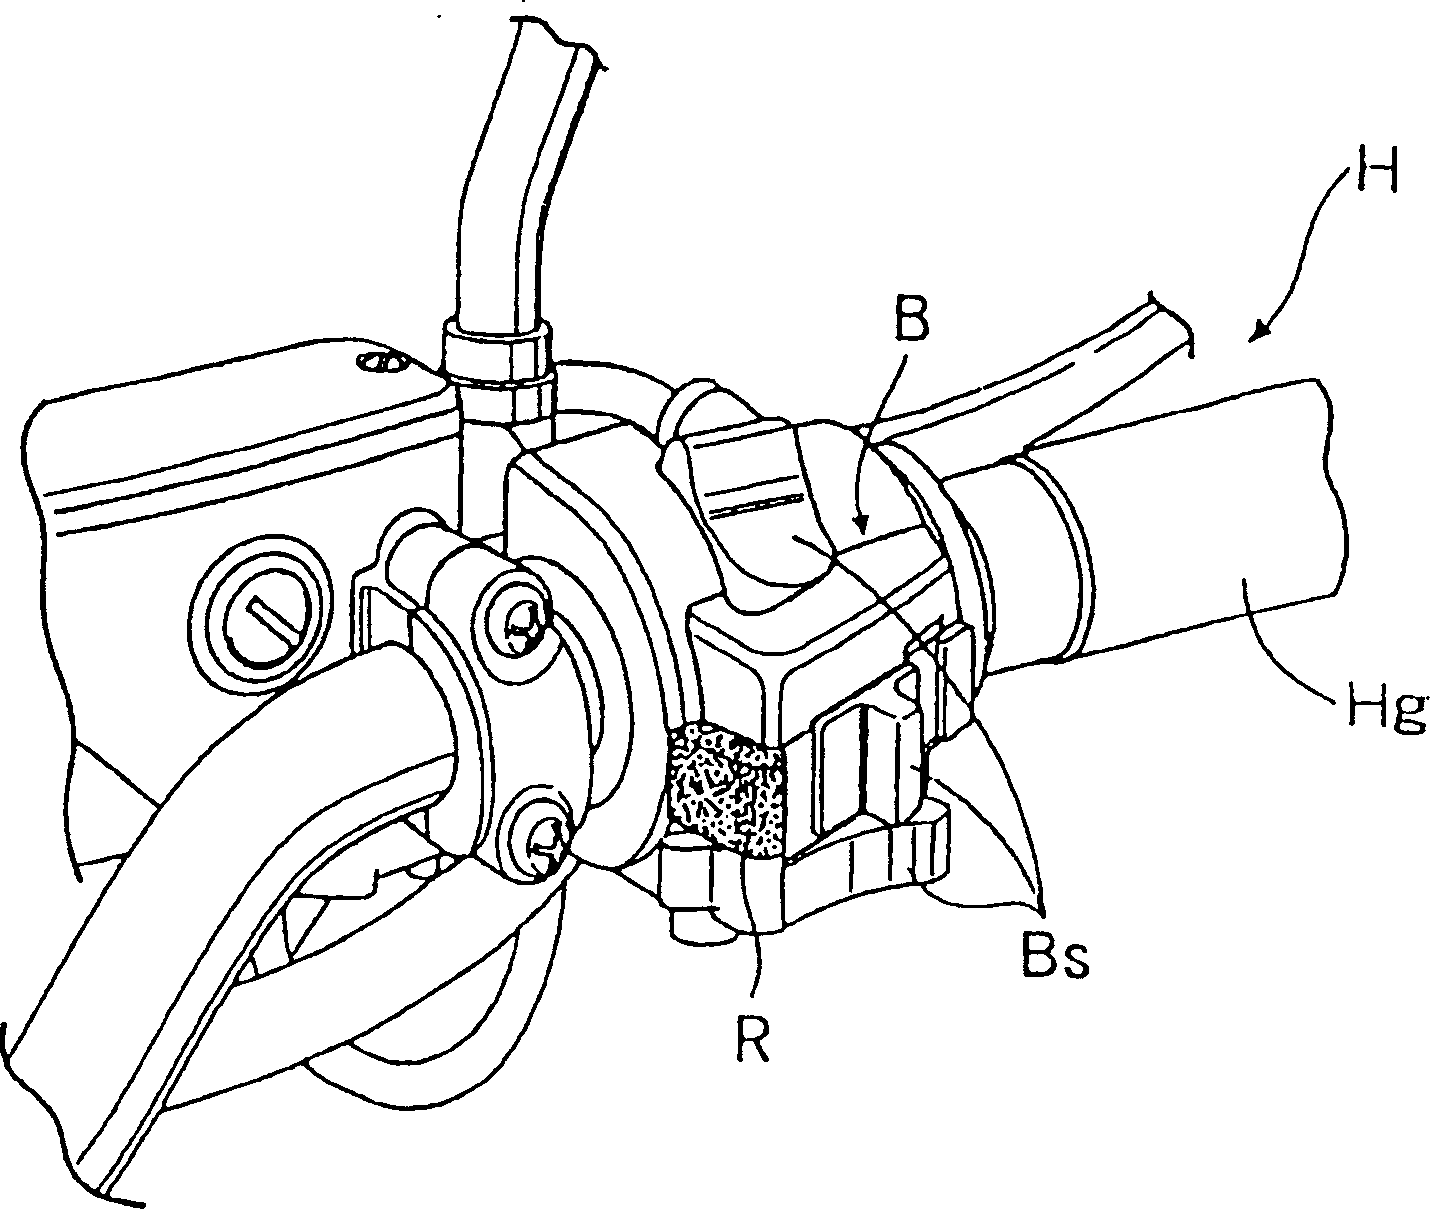 Remote lock operation apparatus for light vehicle